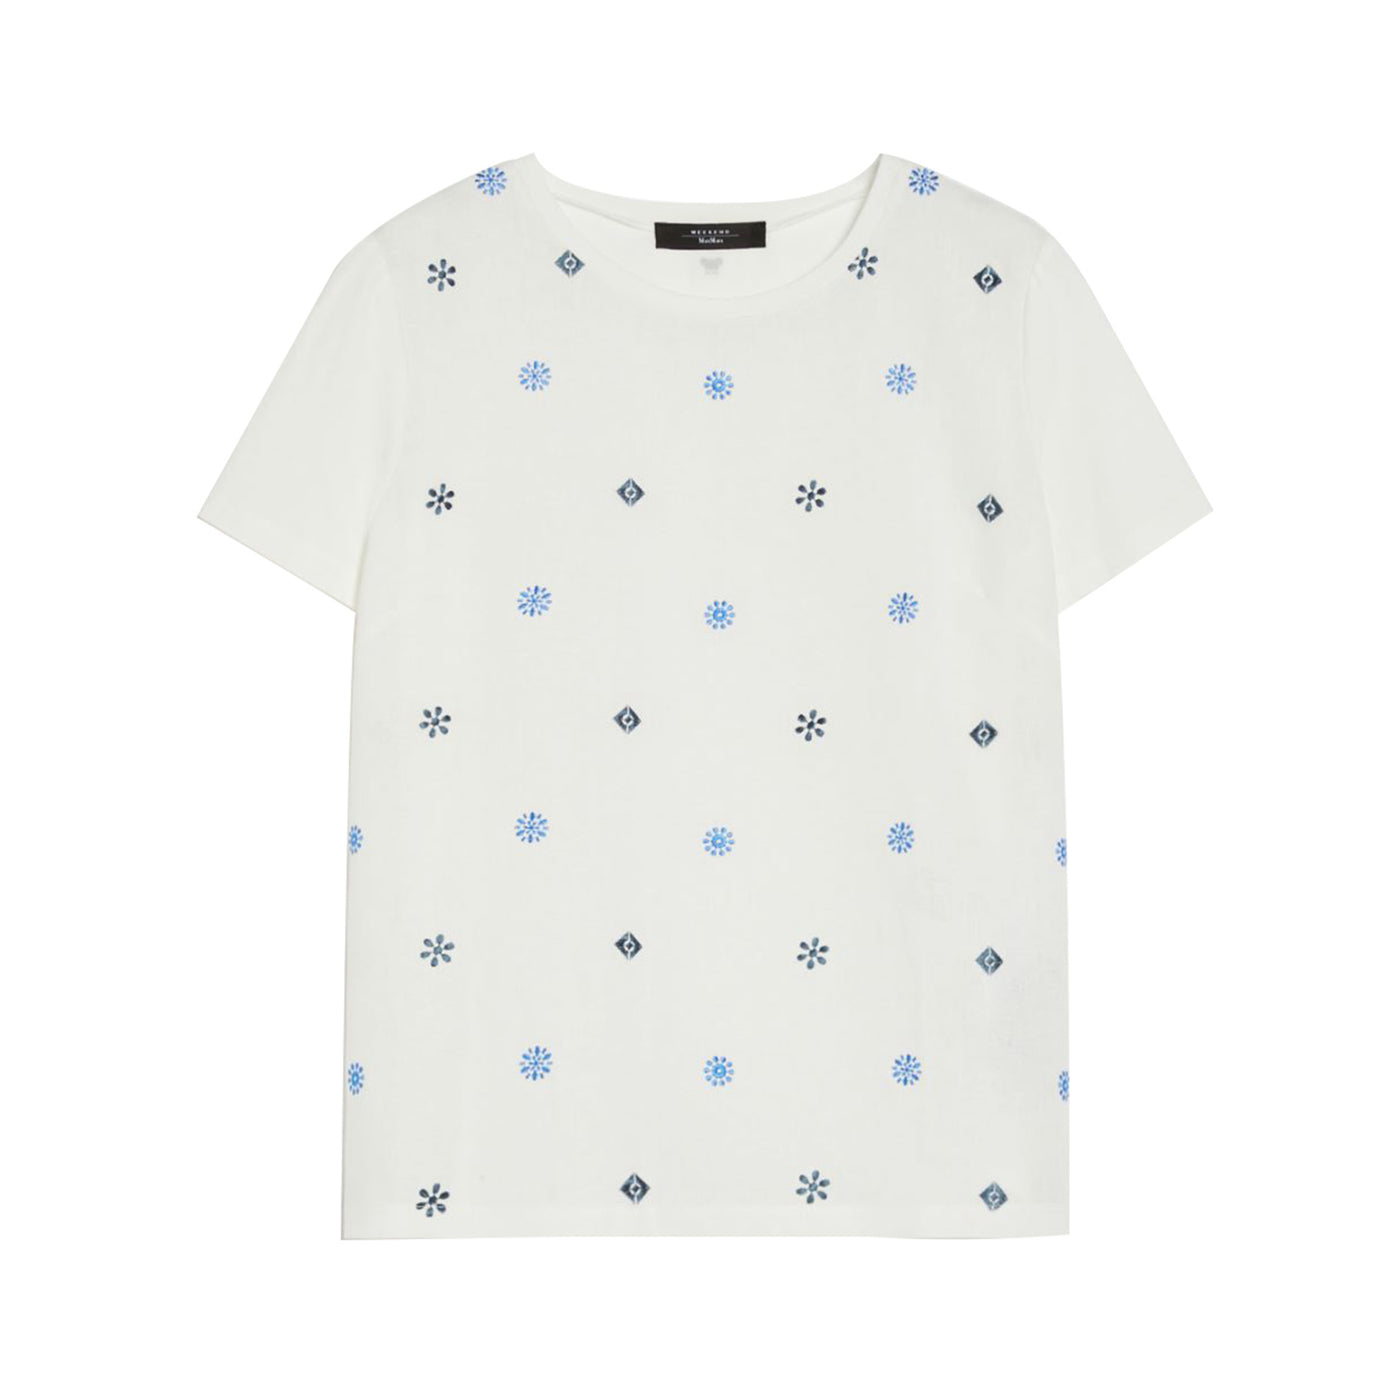 Women's T-Shirt with blue and green geometric prints